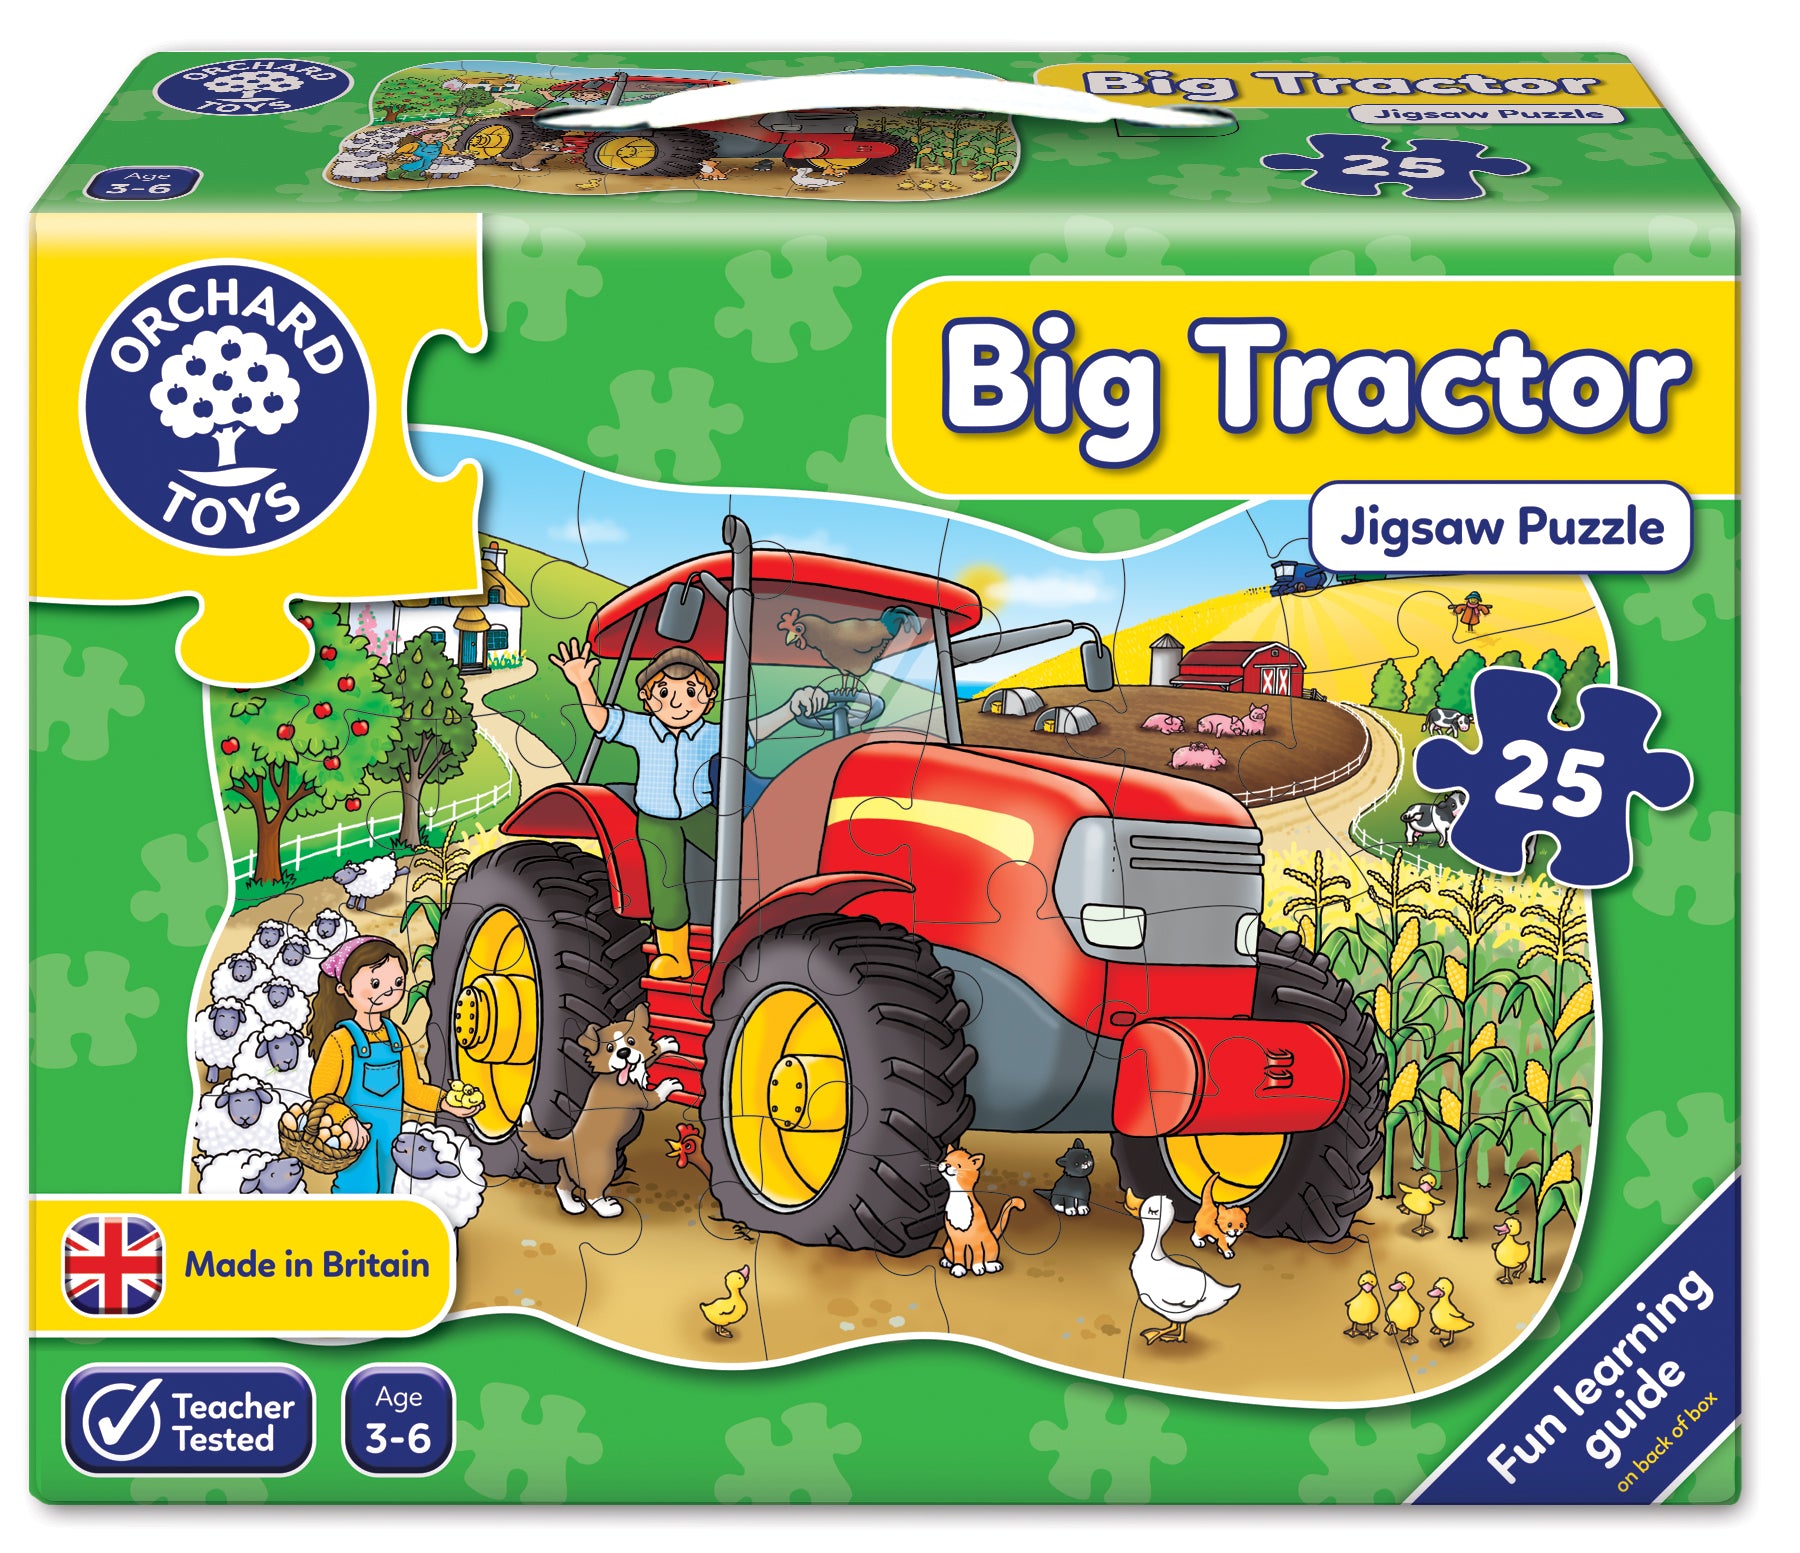 Orchard Big Tractor